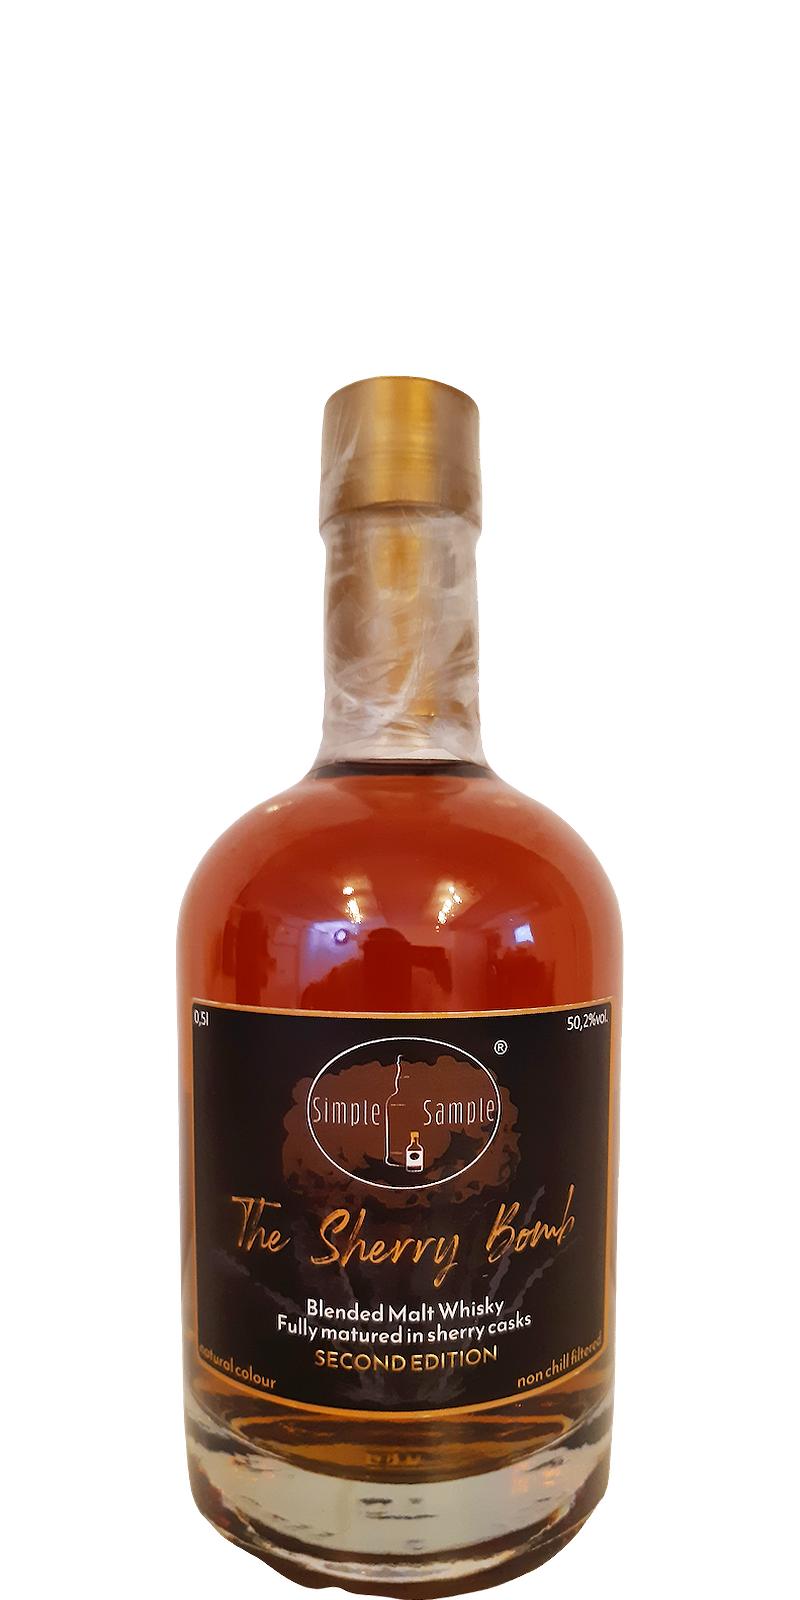 Simple Sample The Sherry Bomb 2nd Edition 50.2% 500ml